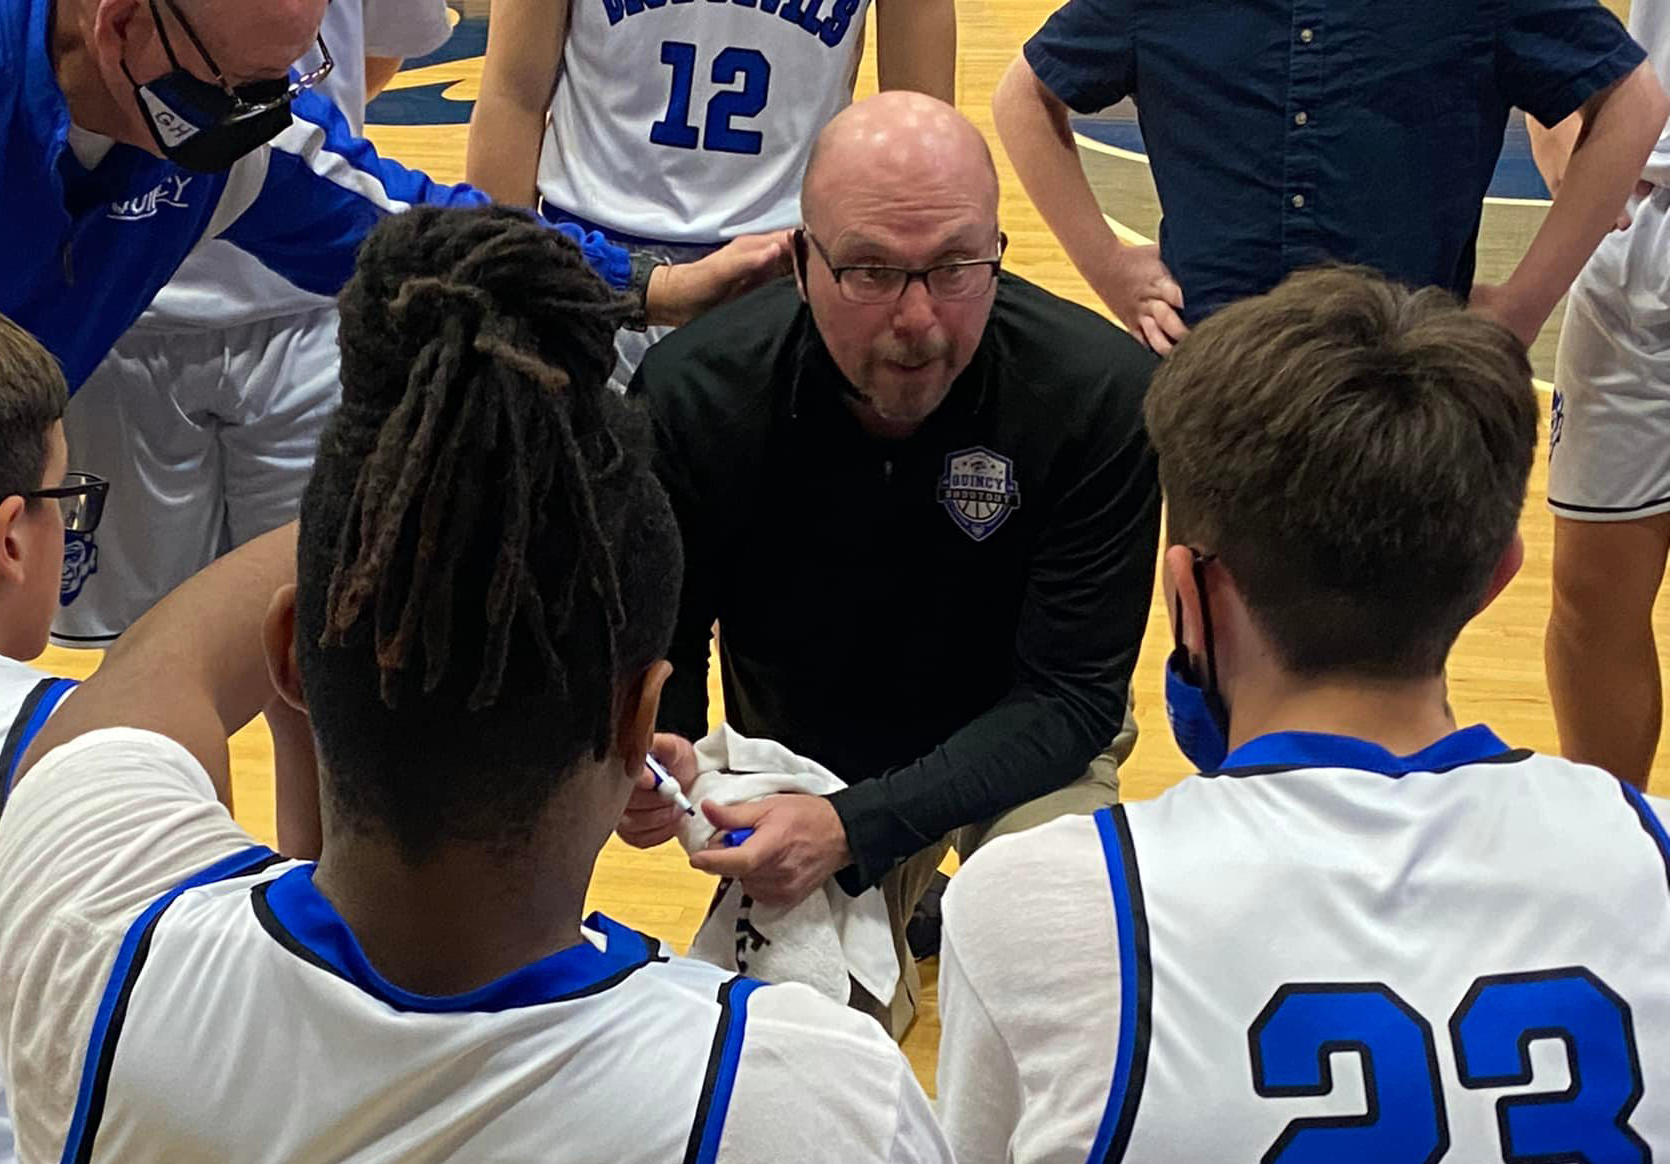 Liberty tabs Sparrow to take over reins of boys basketball program – Muddy River Sports